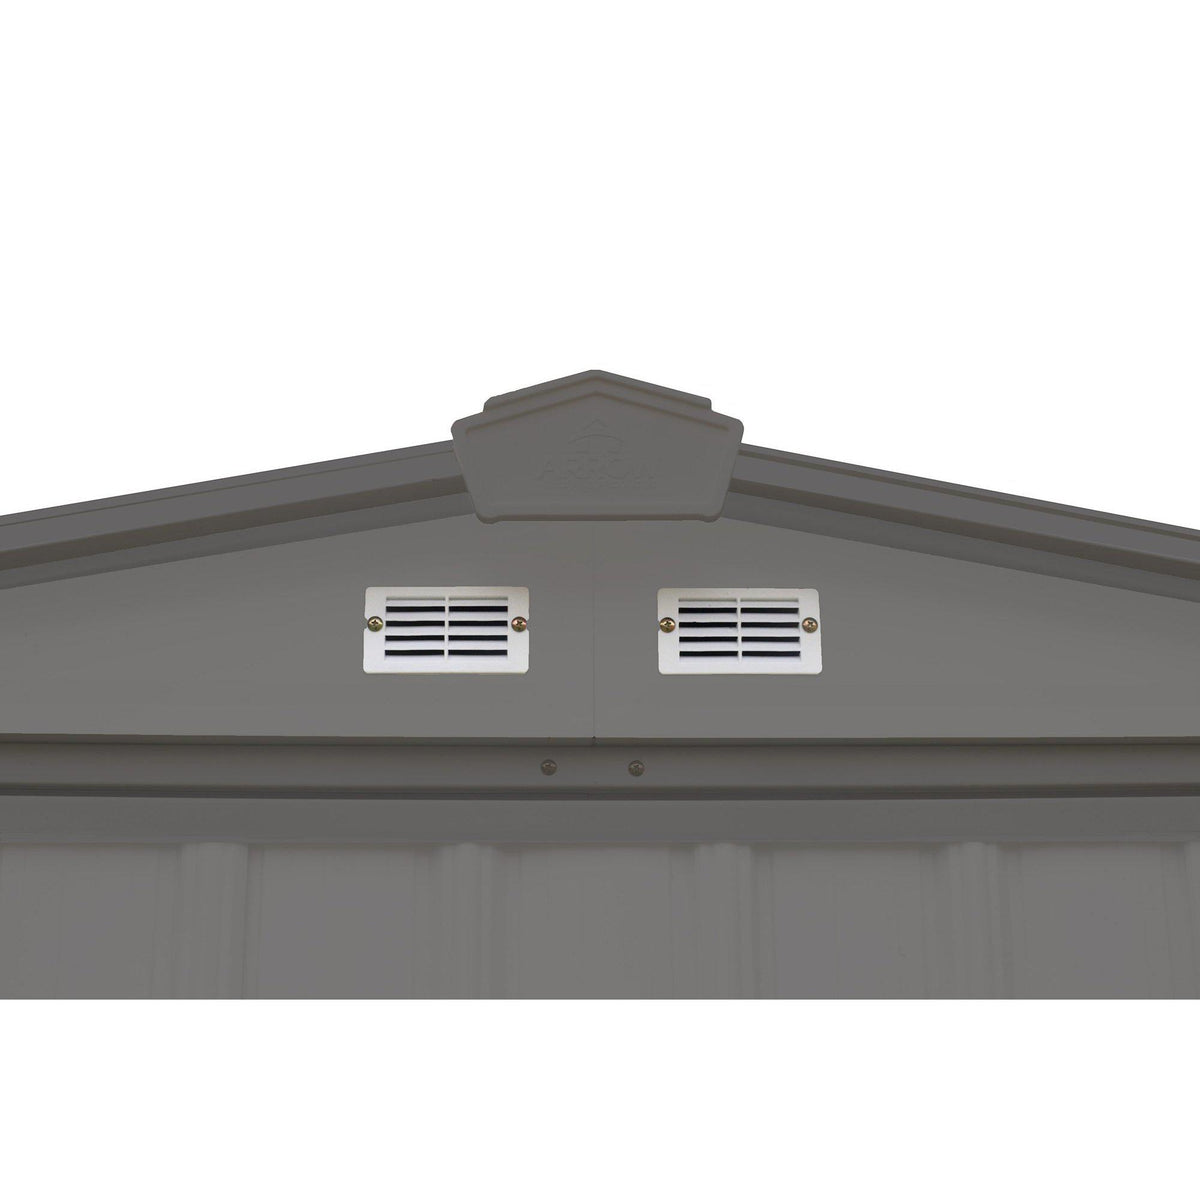 Arrow EZEE Shed Low Gable Steel Storage Shed, Charcoal, 6 x 5 ft.